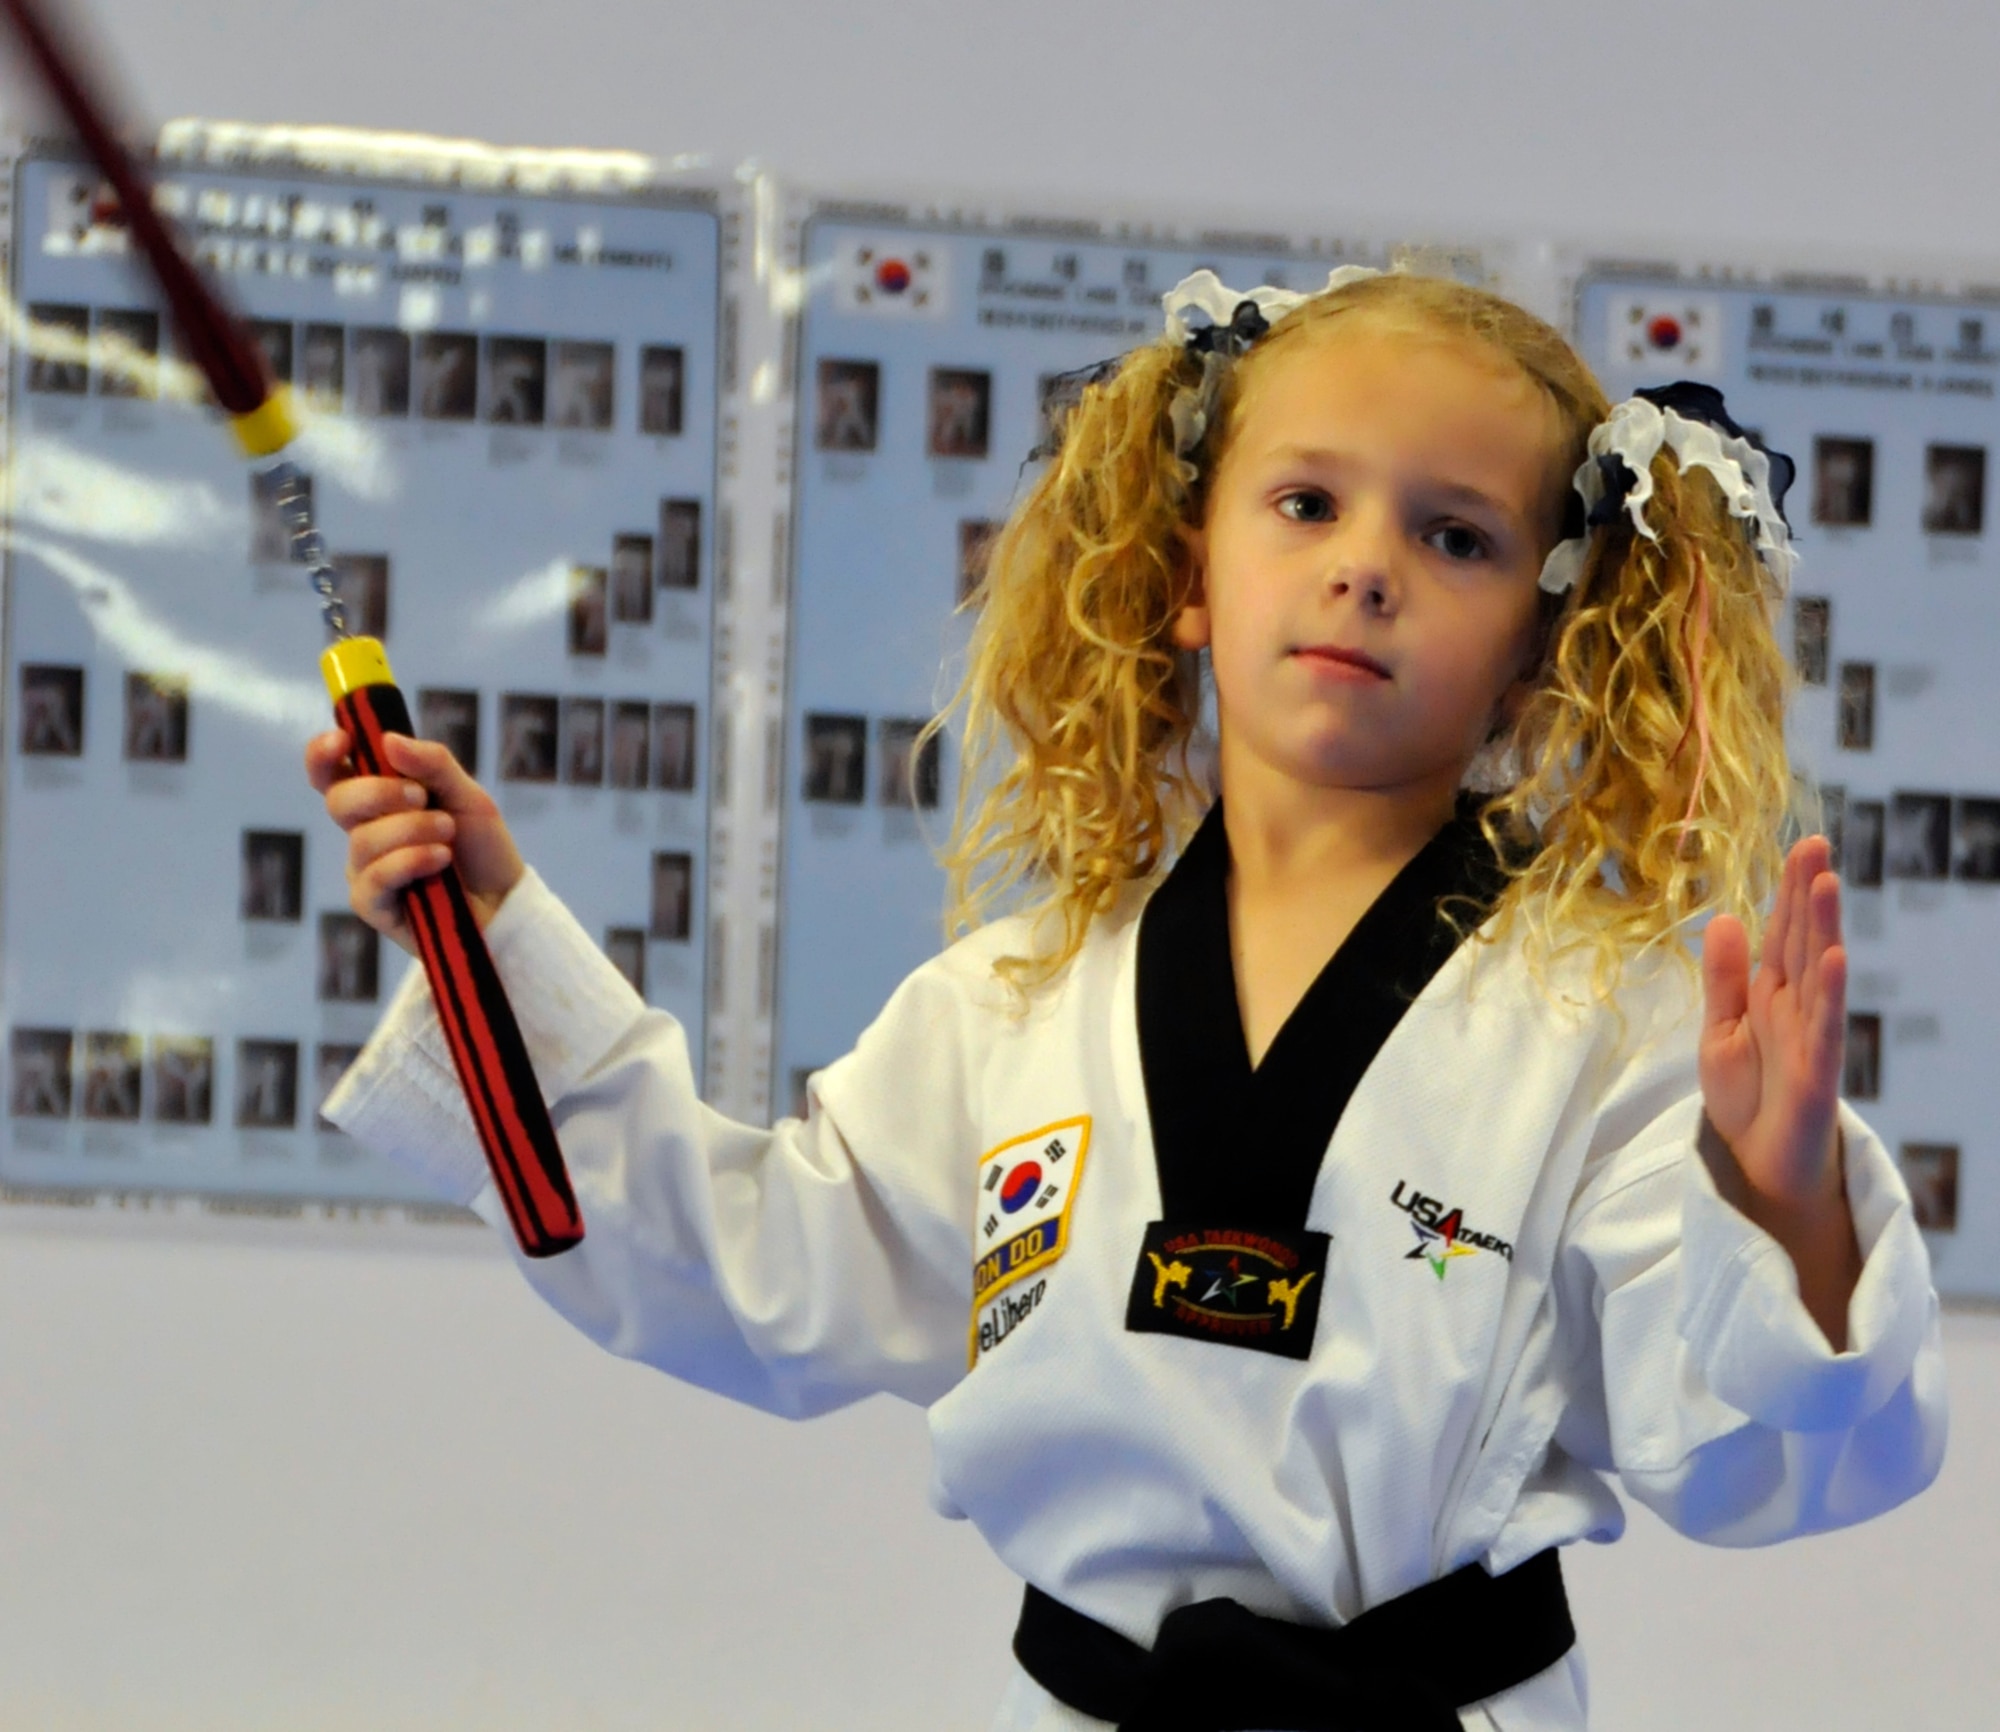 Sidney DeLibero, daughter of a 446th Airlift Wing Reservist, practices with nunchucks at a taekwondo school in Edgewood, Wash., Oct. 17. DiLibero became the world's youngest taekwondo black belt, at age 6, Sept. 20. (U.S. Air Force Photo/Staff Sgt. Rachael Garneau)